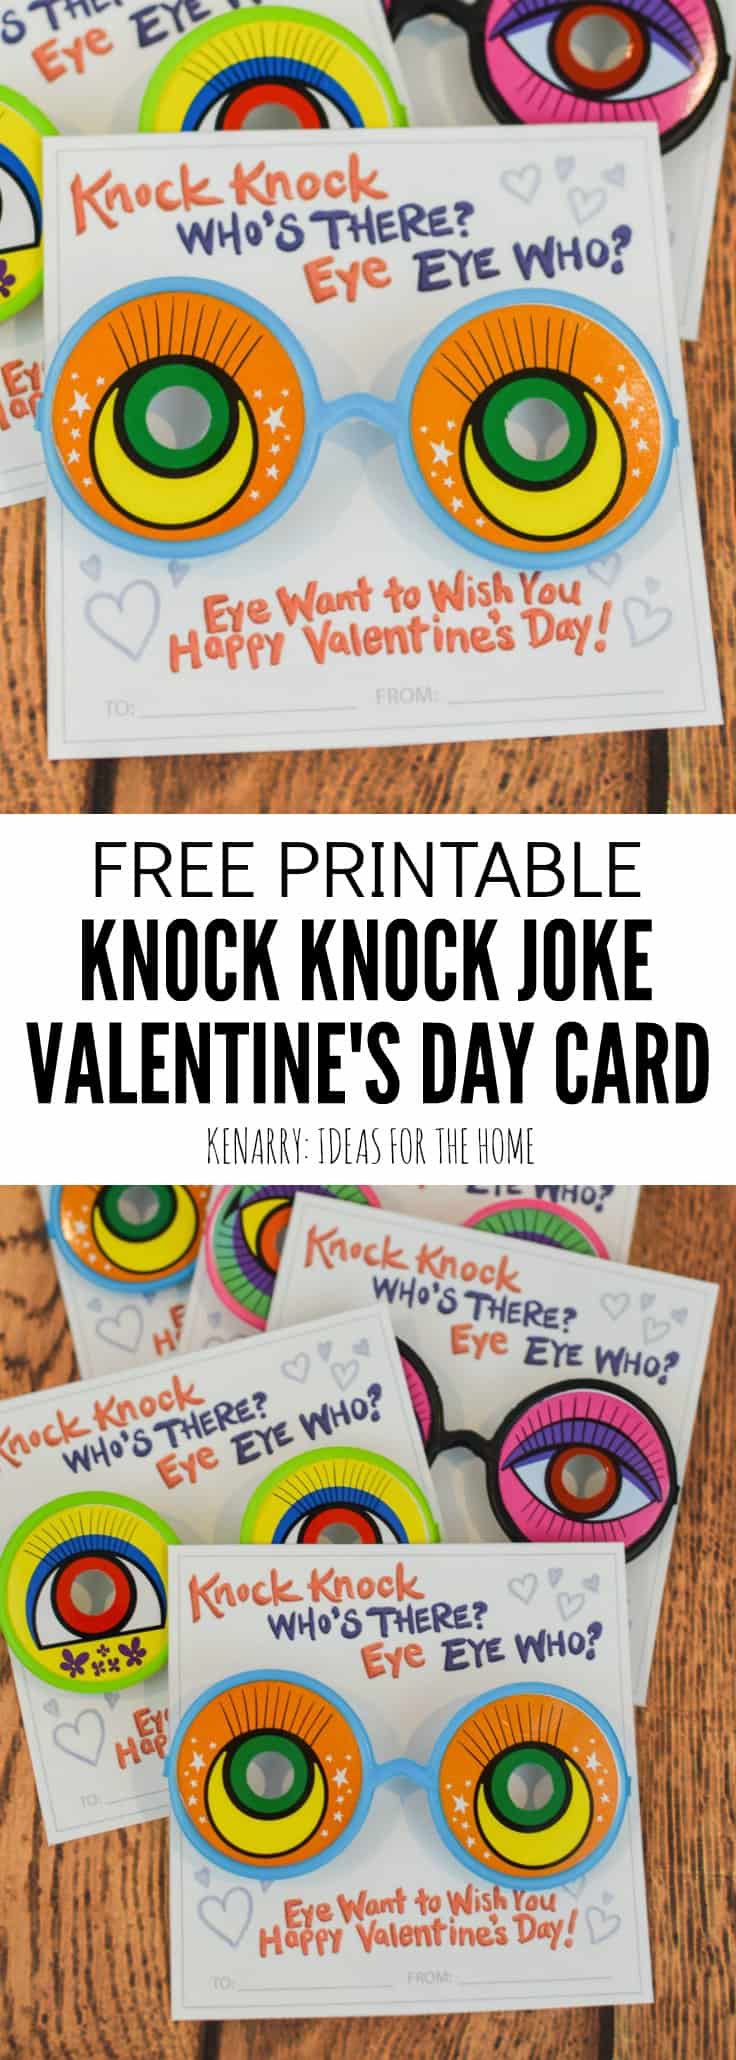 Who doesn't love a good joke? Use funny glasses from the dollar store or googly eyes to dress up these funny knock knock valentines for kids. These free printable Valentine cards are sure to bring laughter to the school Valentine's Day party.